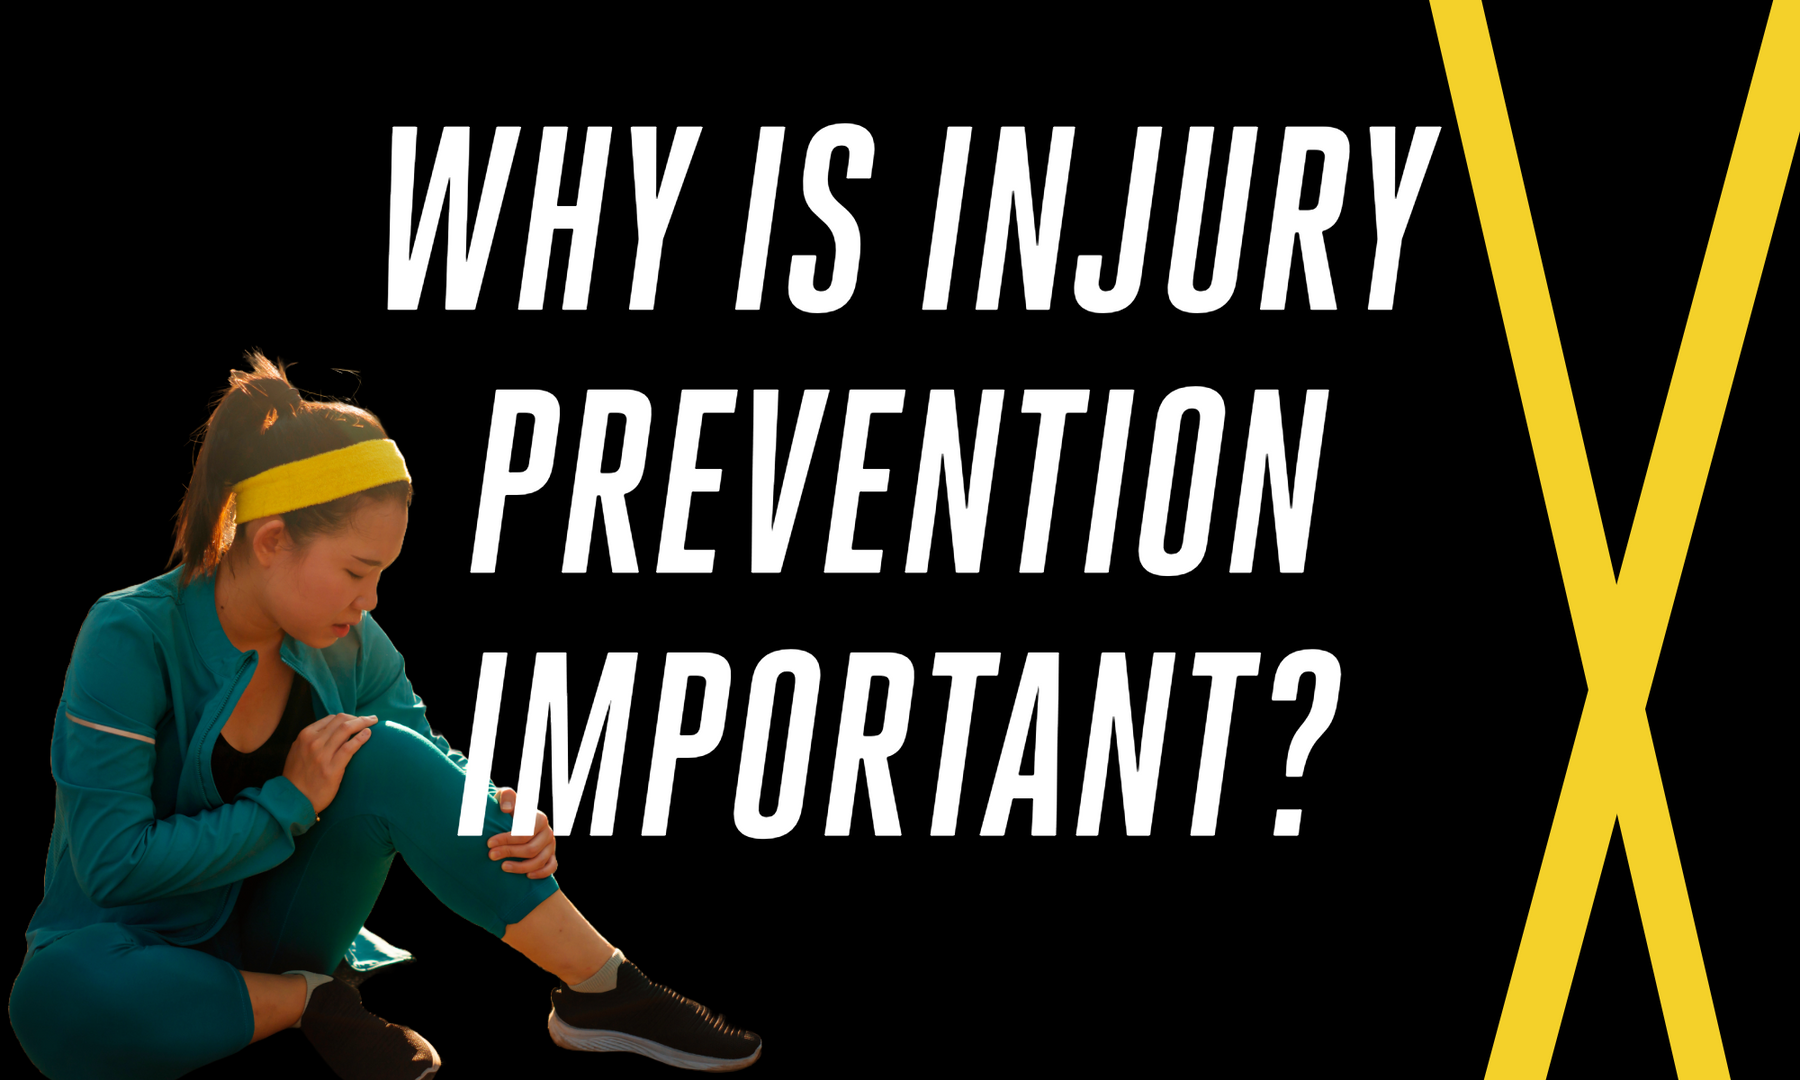 Why is Injury Prevention Important?